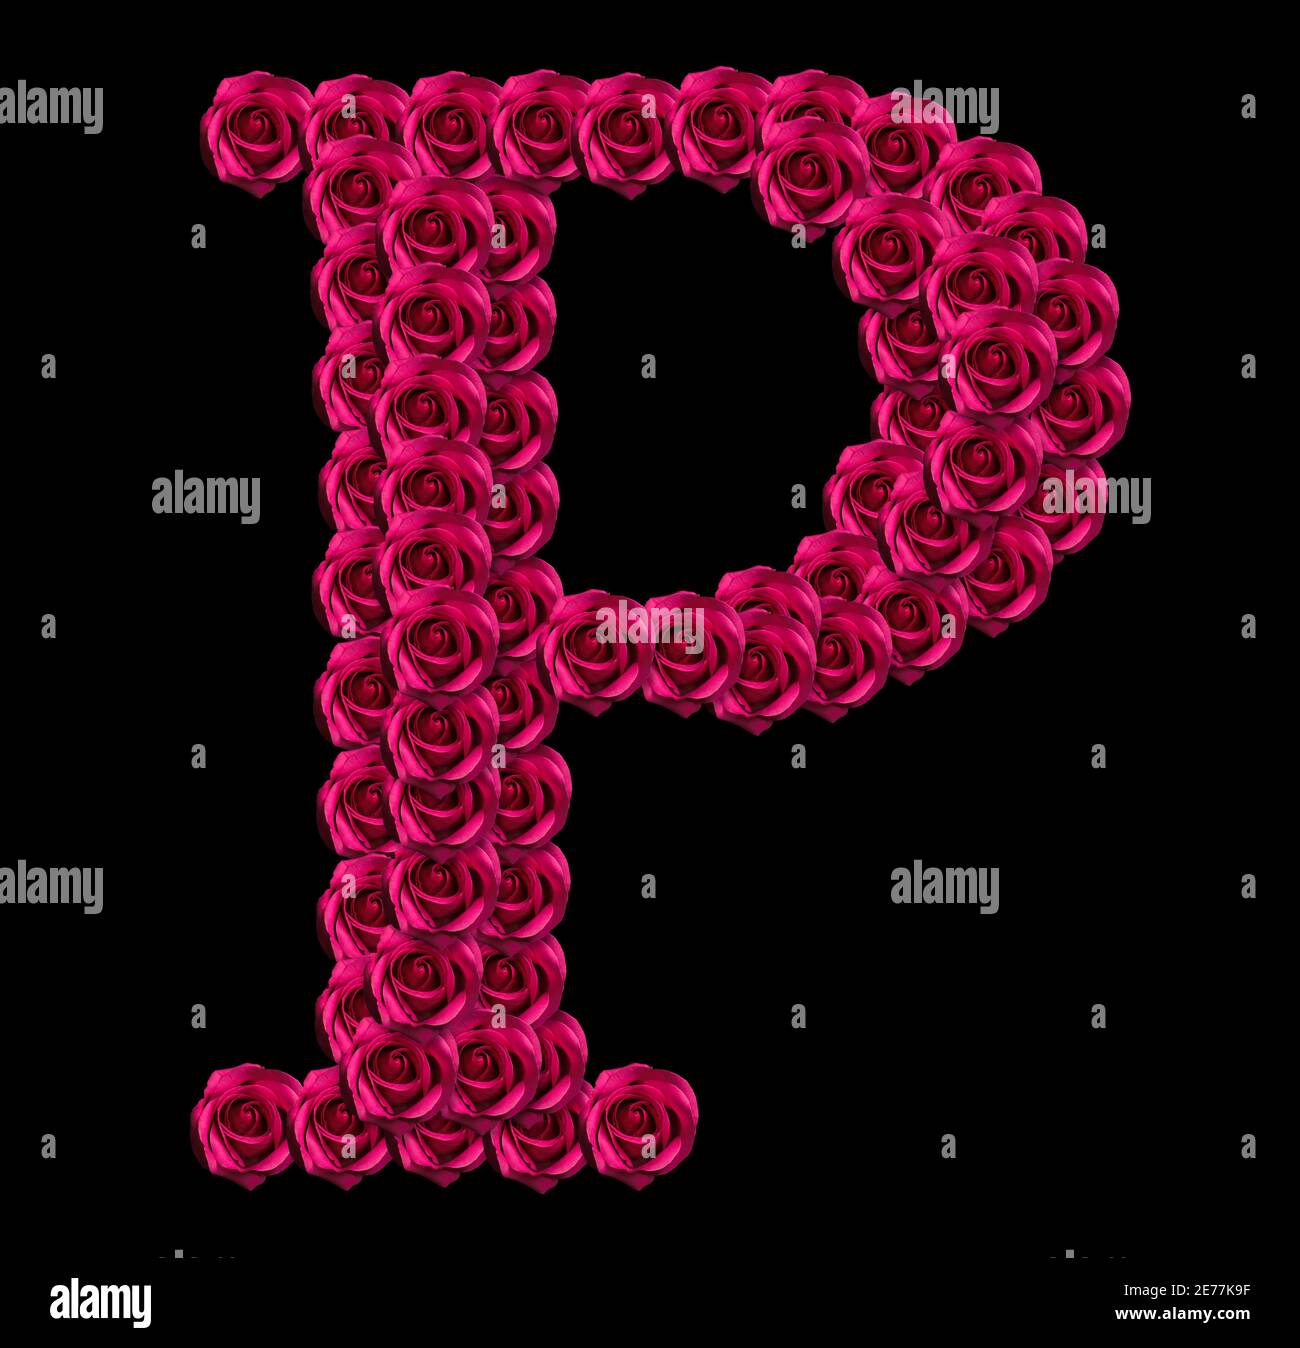 romantic concept image of a capital letter P made of red roses. Isolated on black background. Design element for love or valentines themes Stock Photo